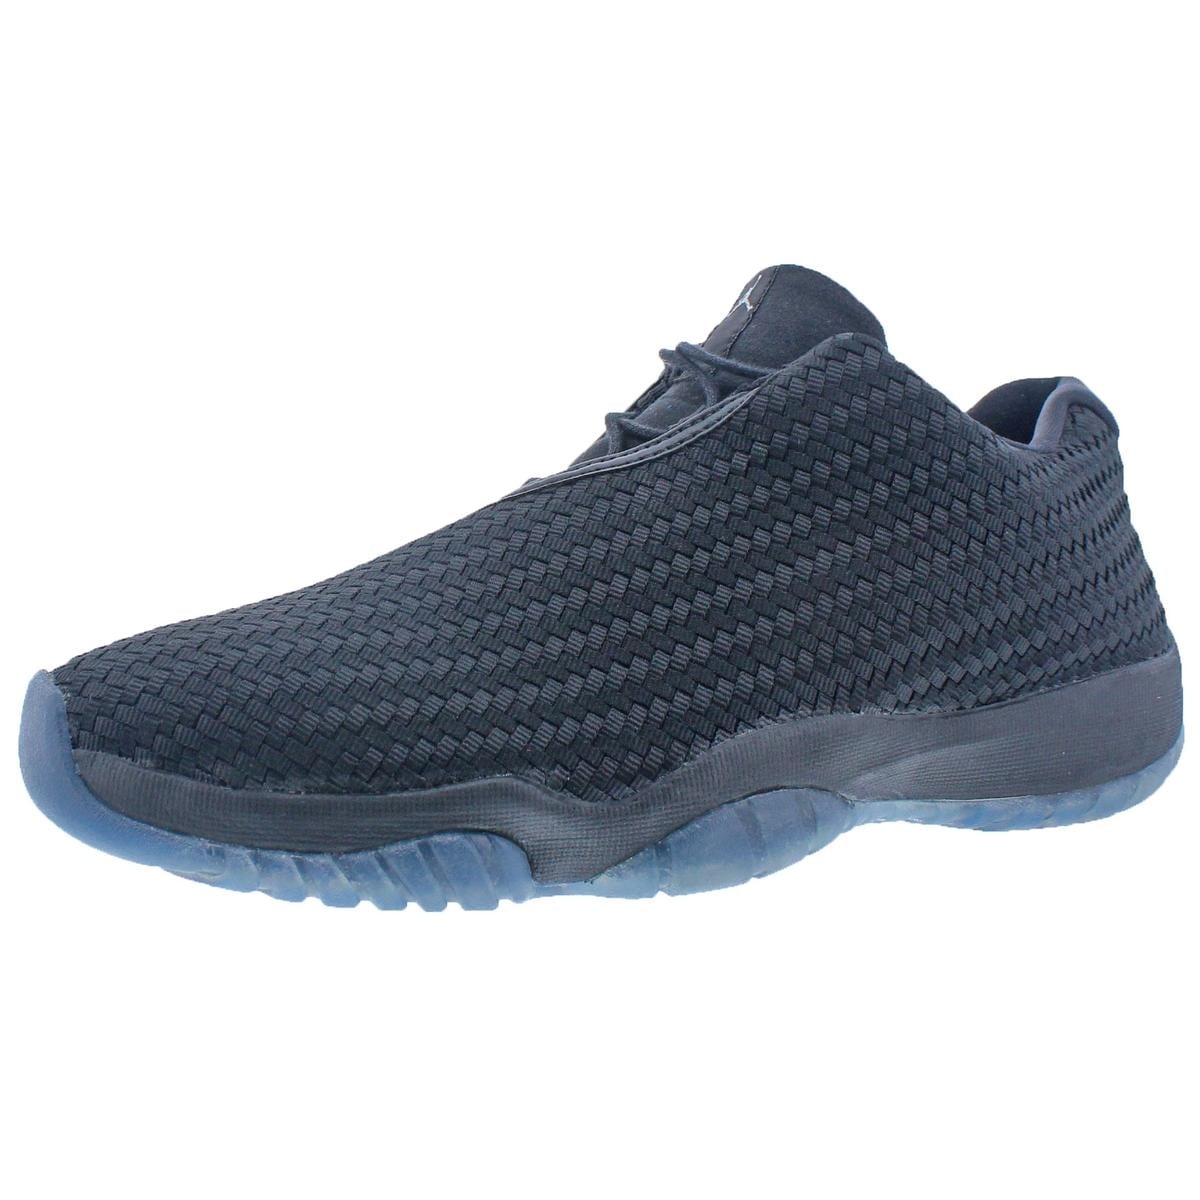 lightest low top basketball shoes